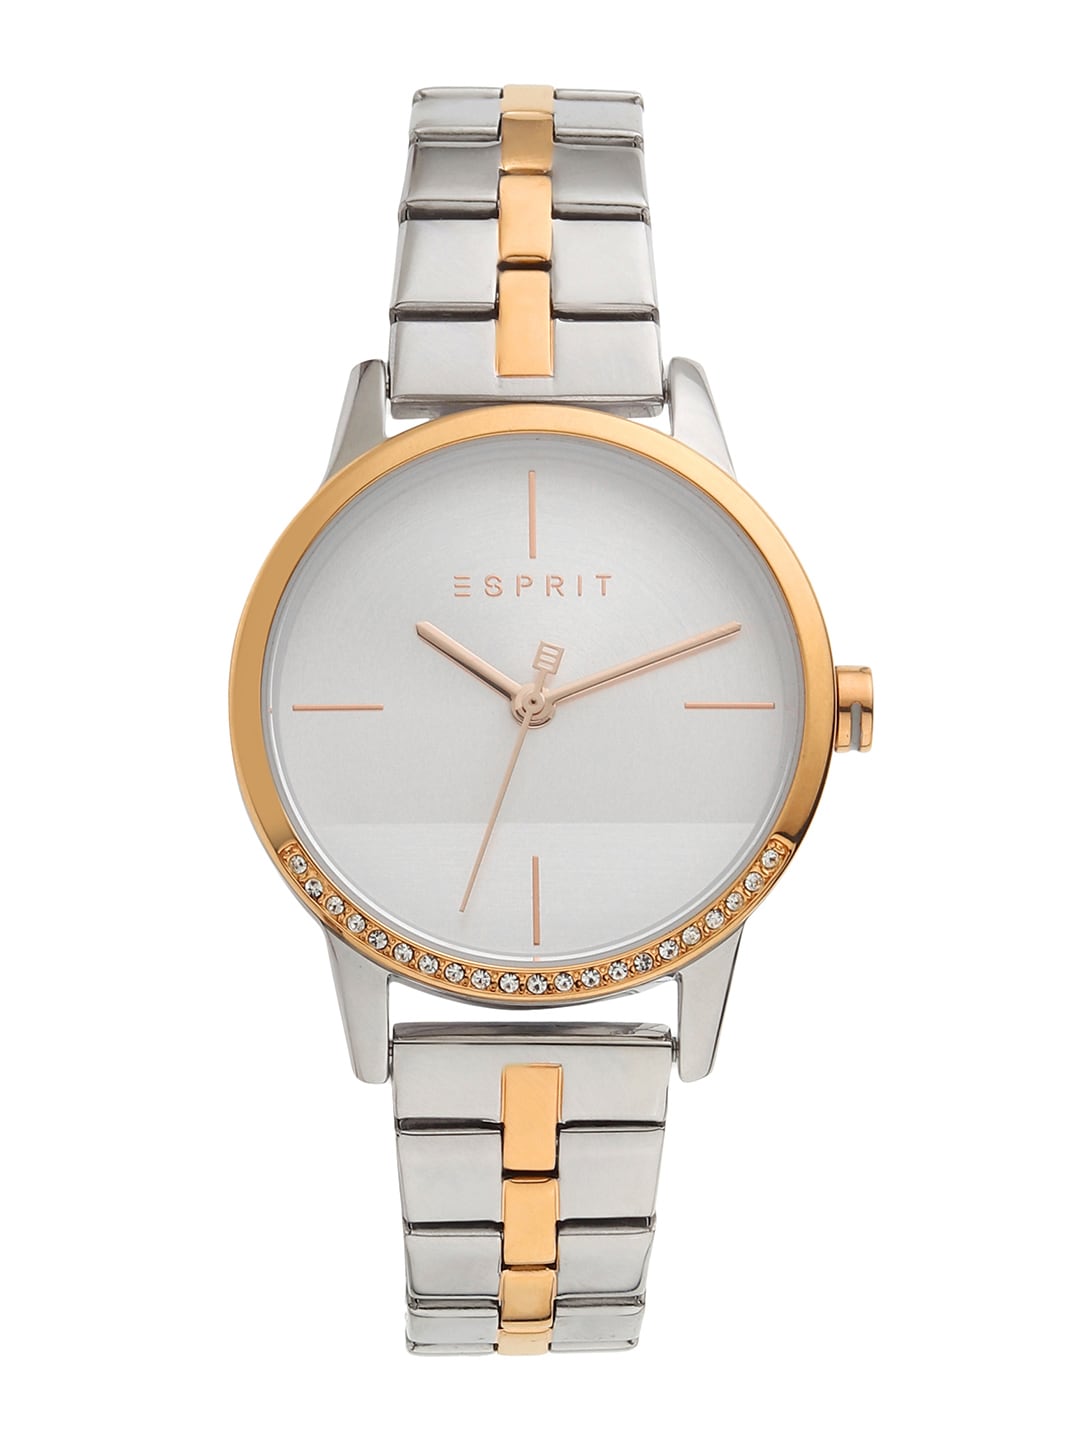 ESPRIT Women Silver-Toned Analogue Watch ES1L106M0105 Price in India